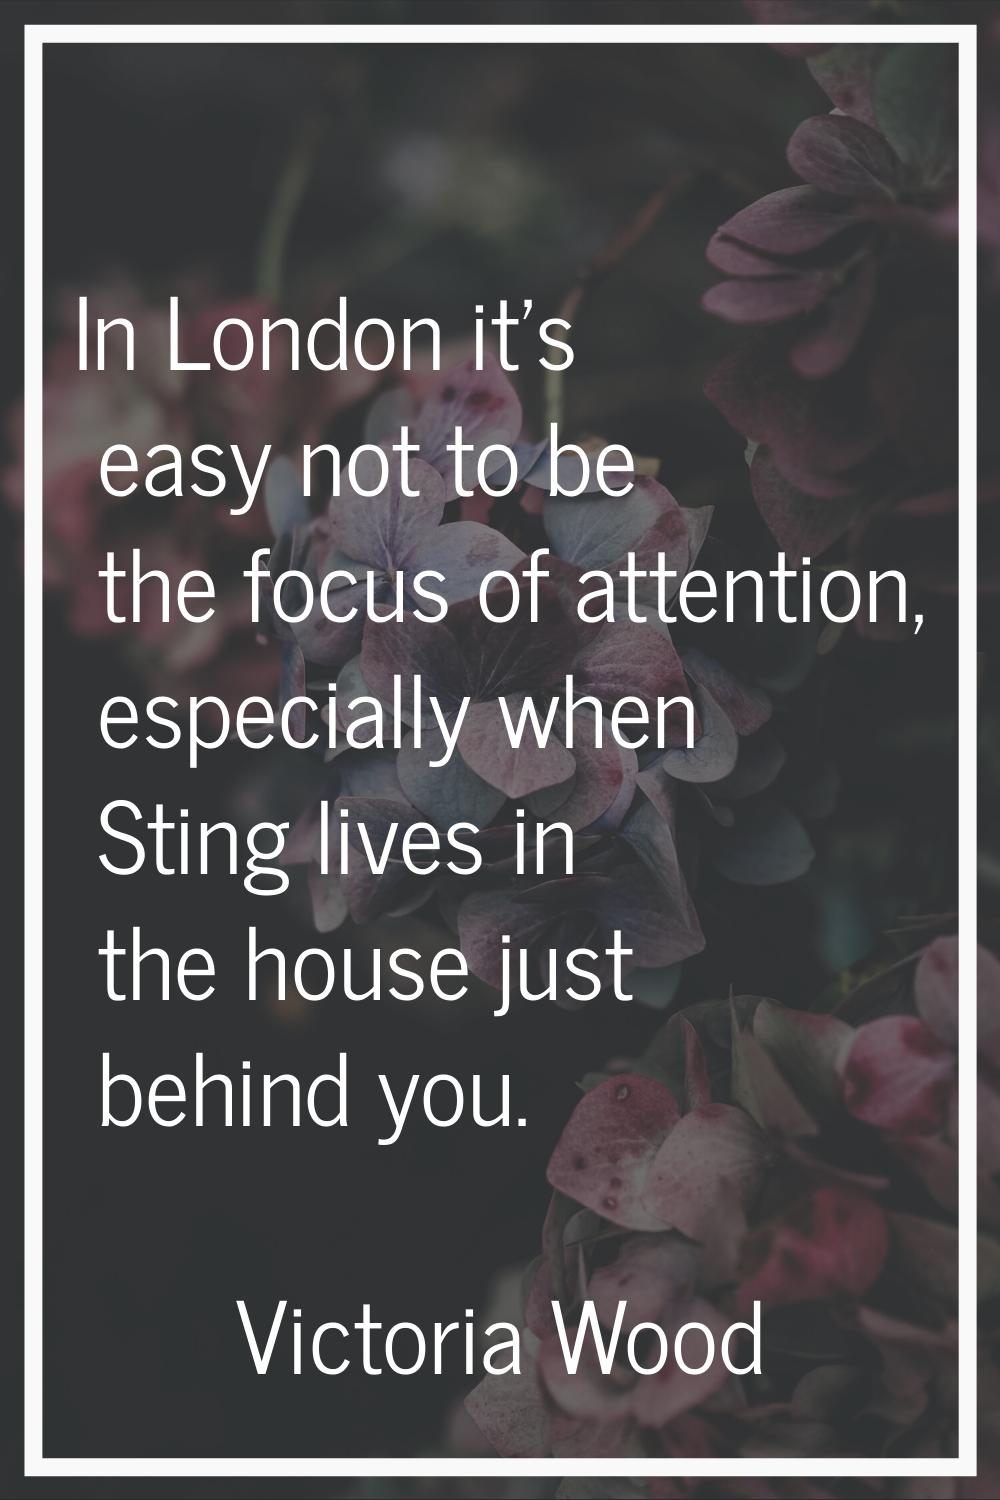 In London it's easy not to be the focus of attention, especially when Sting lives in the house just